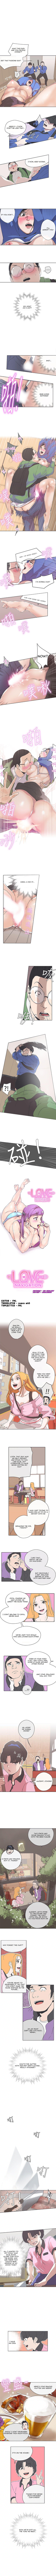 Love Navigation - Chapter 32 Page 1